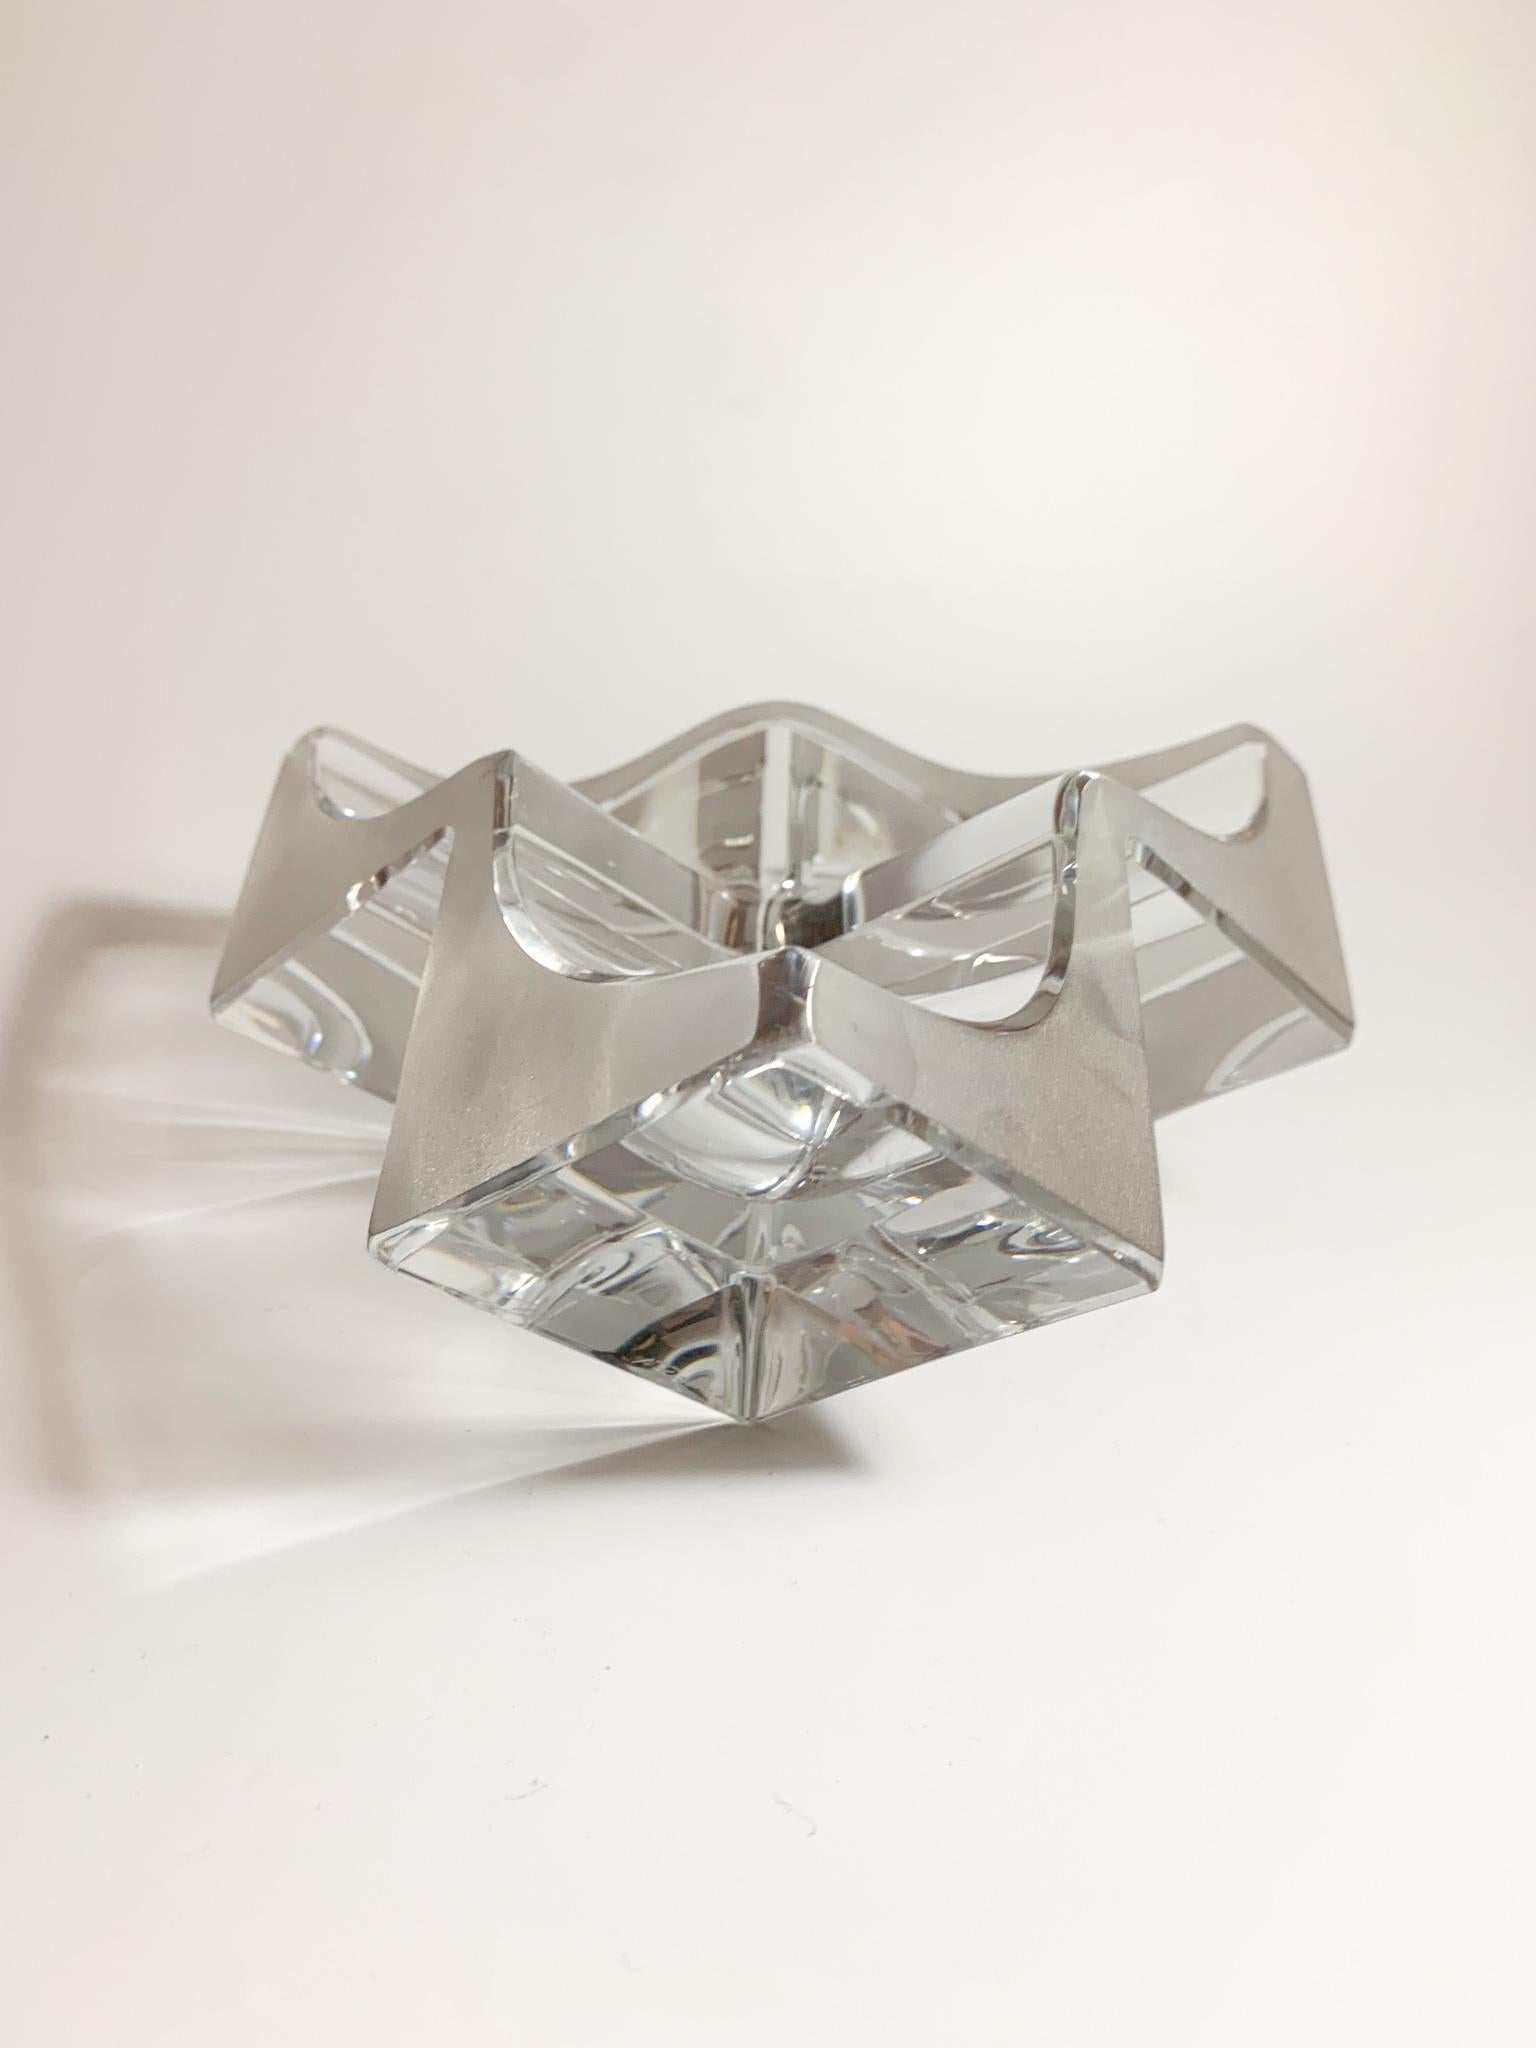 Late 20th Century Geometric Abstract Sculpture in Transparent Crystal by Daum from the, 70s